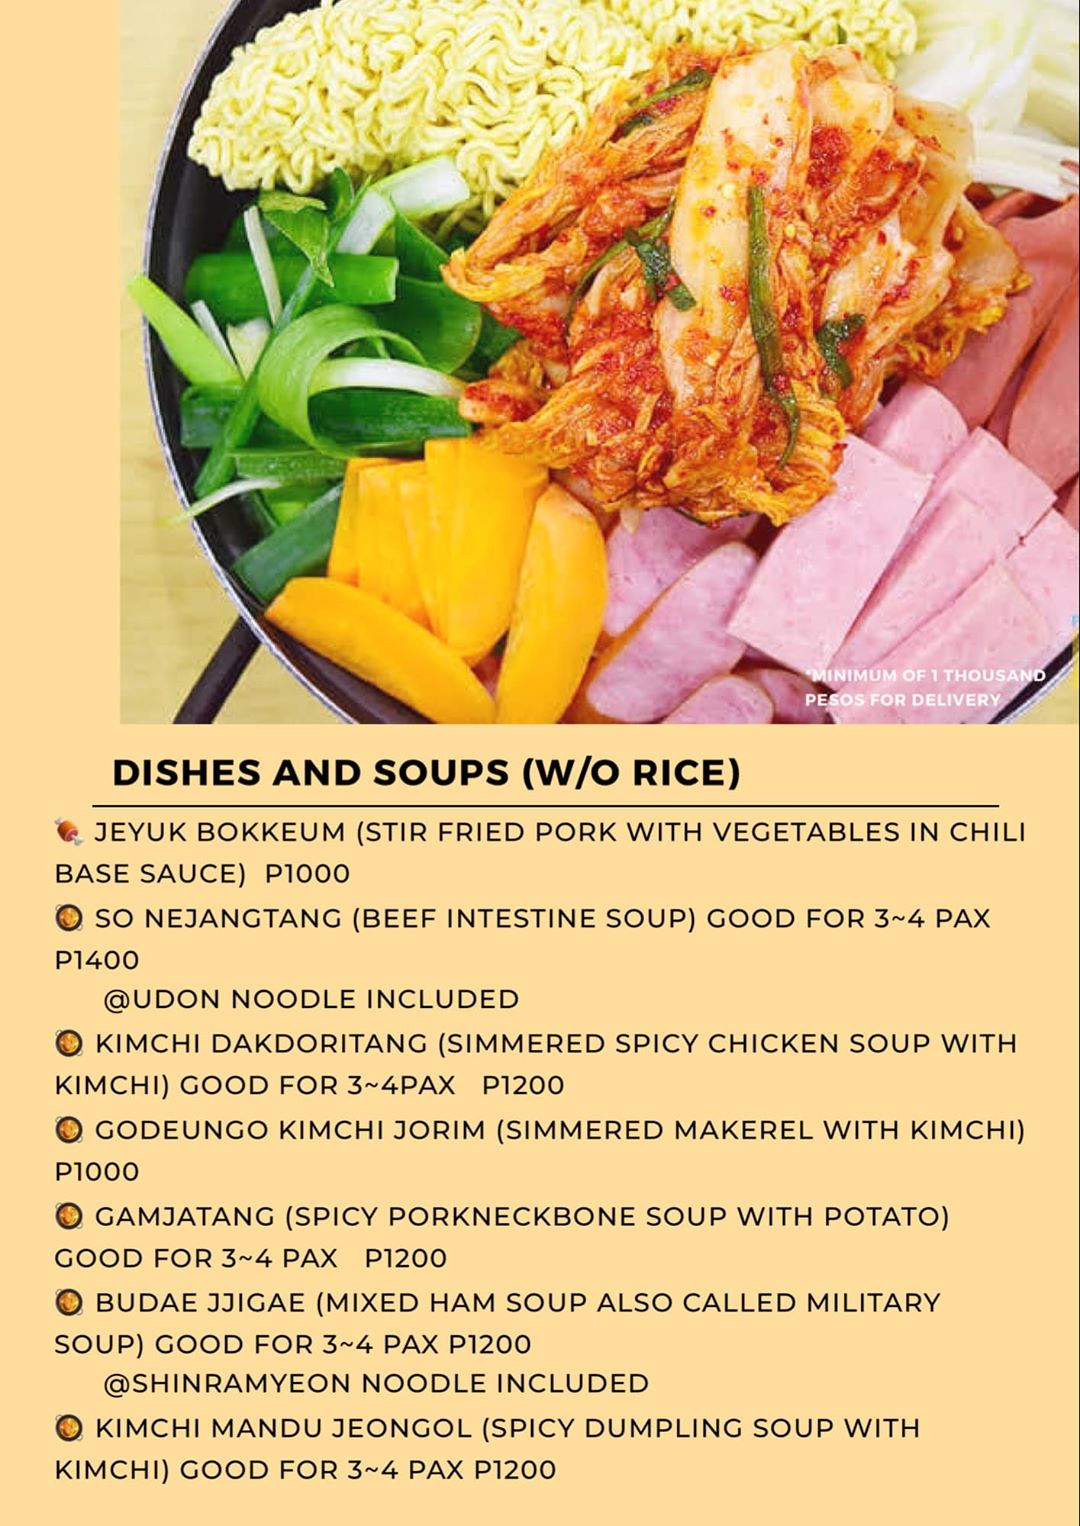 Soga Miga dishes and soups